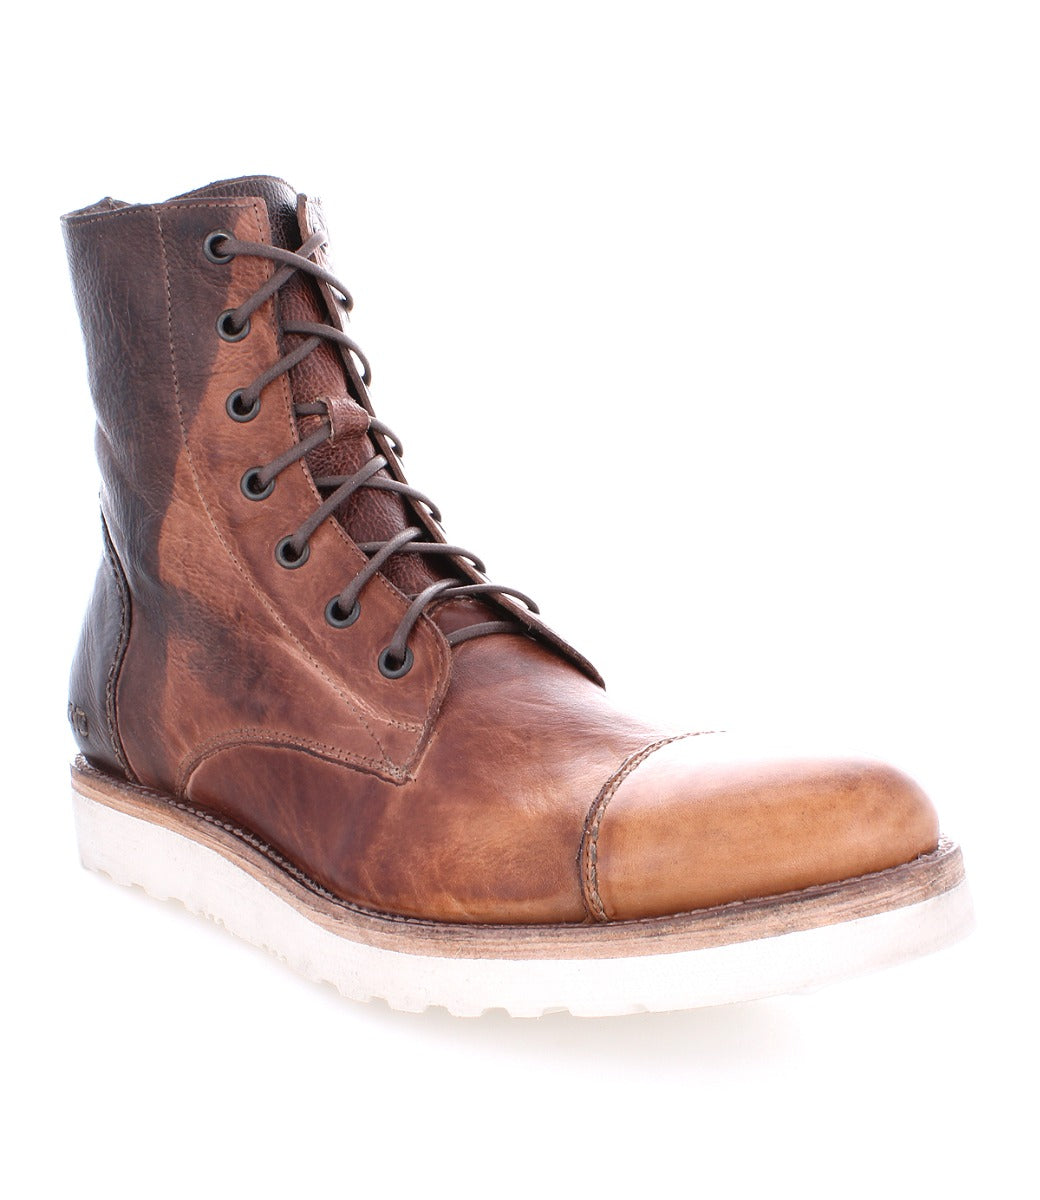 A men's brown Protege Light boot with laces and a white sole by Bed Stu.